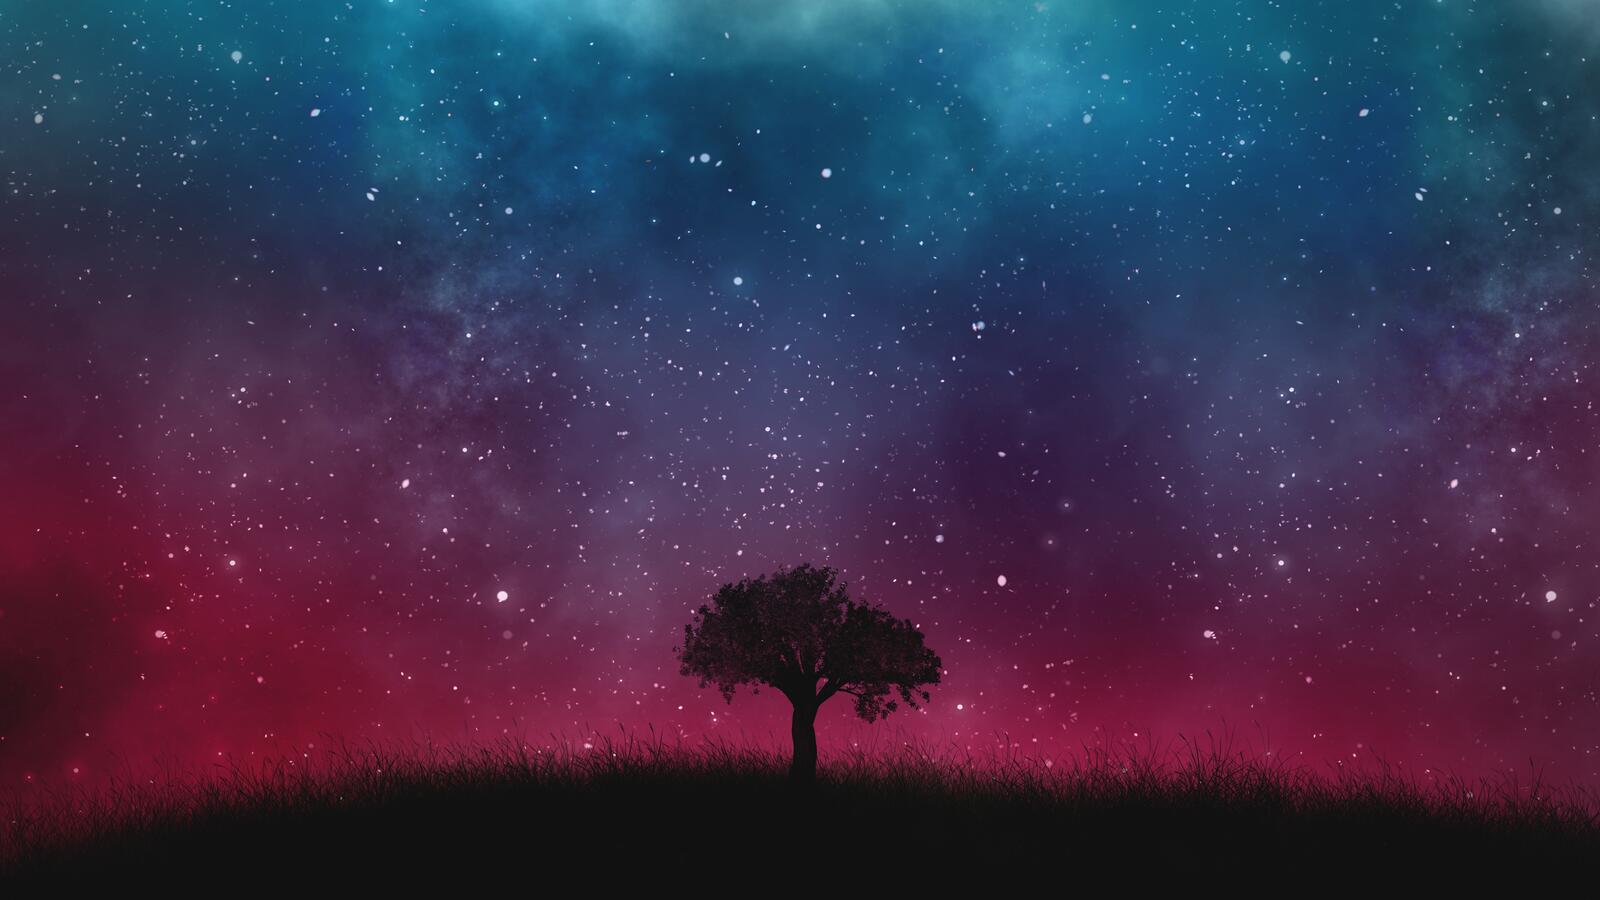 Wallpapers wallpaper lonely tree starry sky night on the desktop